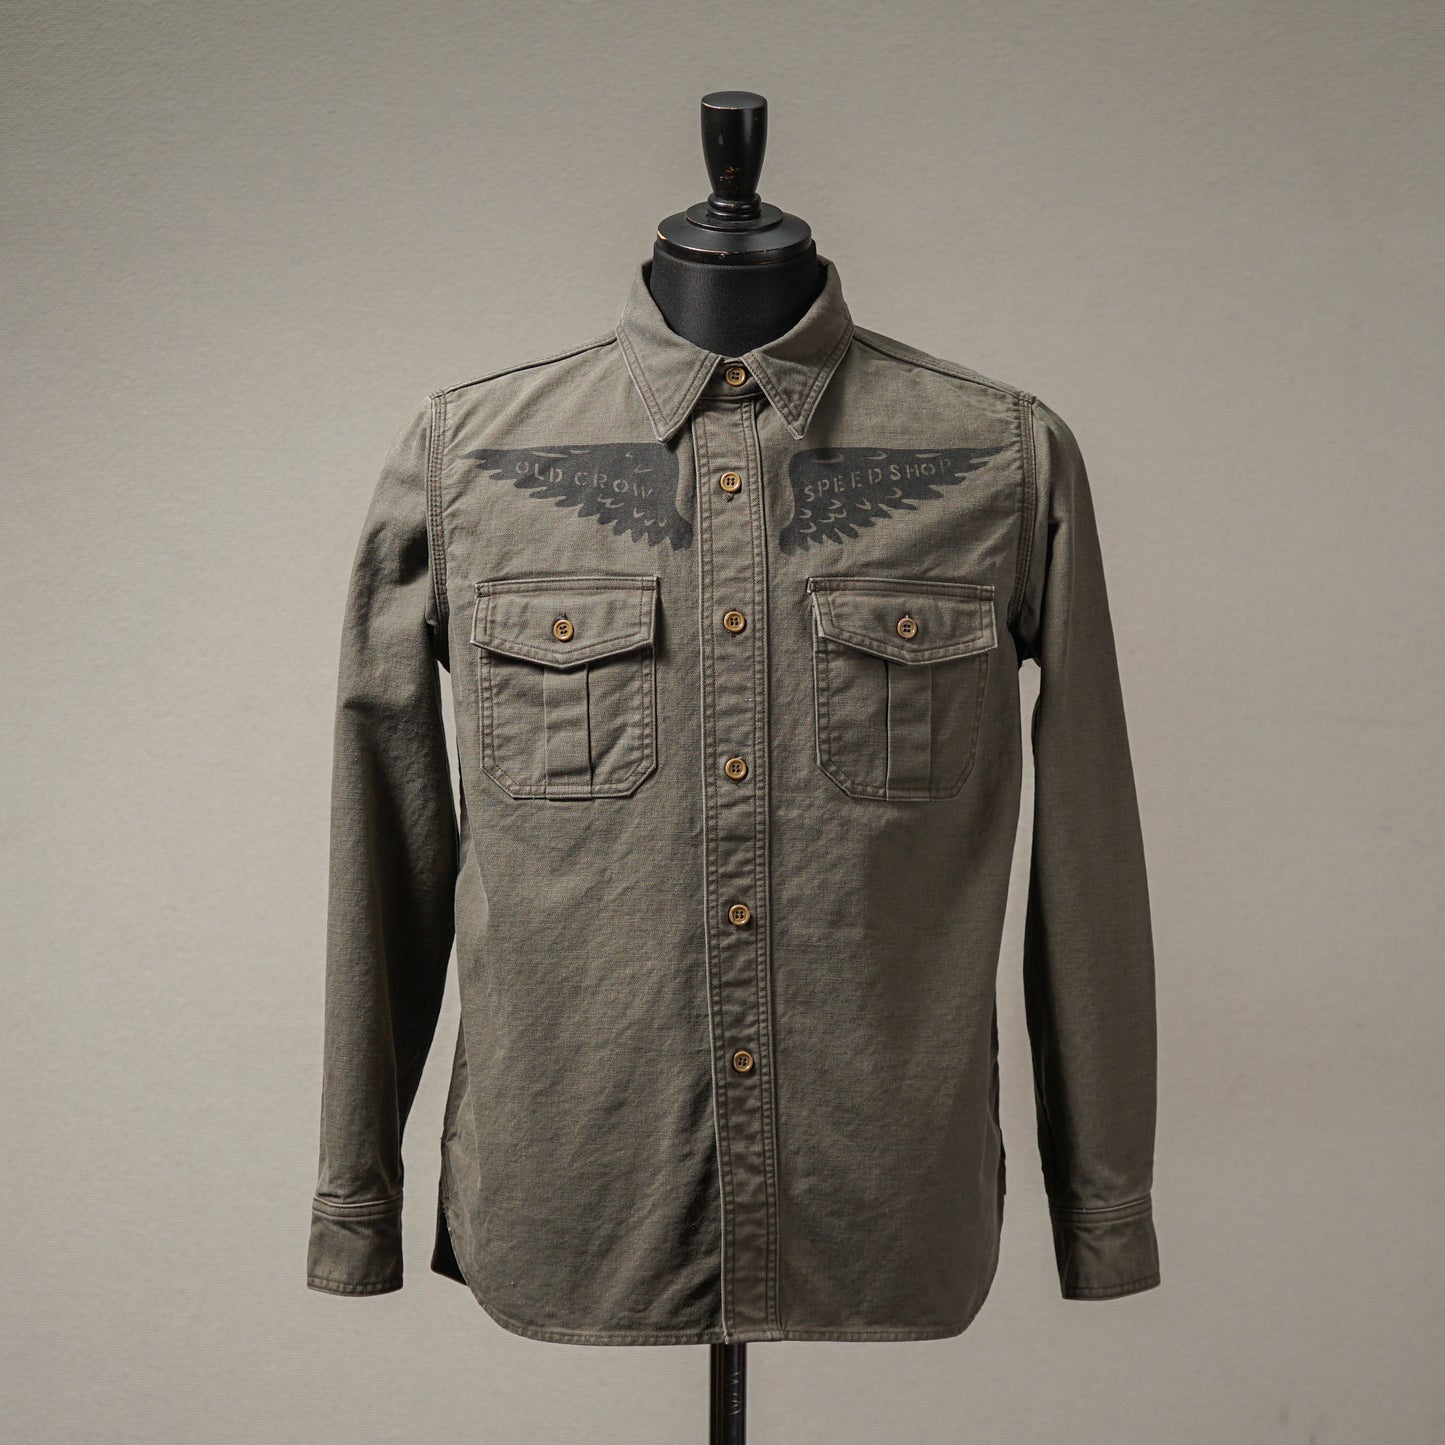 CROW WING - L/S WORK SHIRTS / OC-22-AW-06